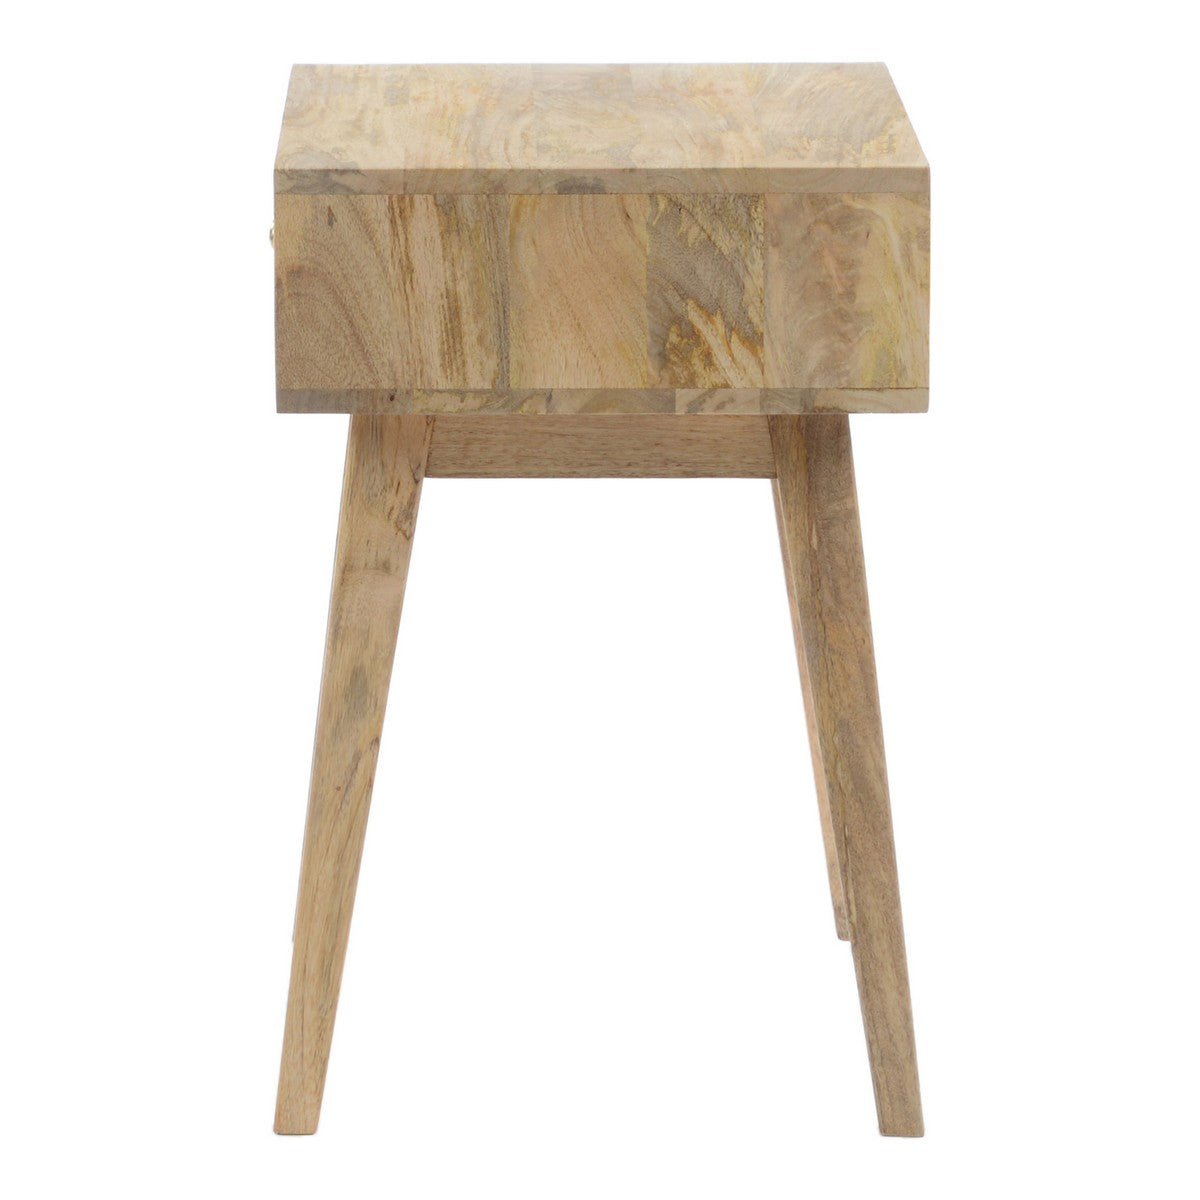 Moe's Home Collection Reed Side Table Natural - BZ-1107-24